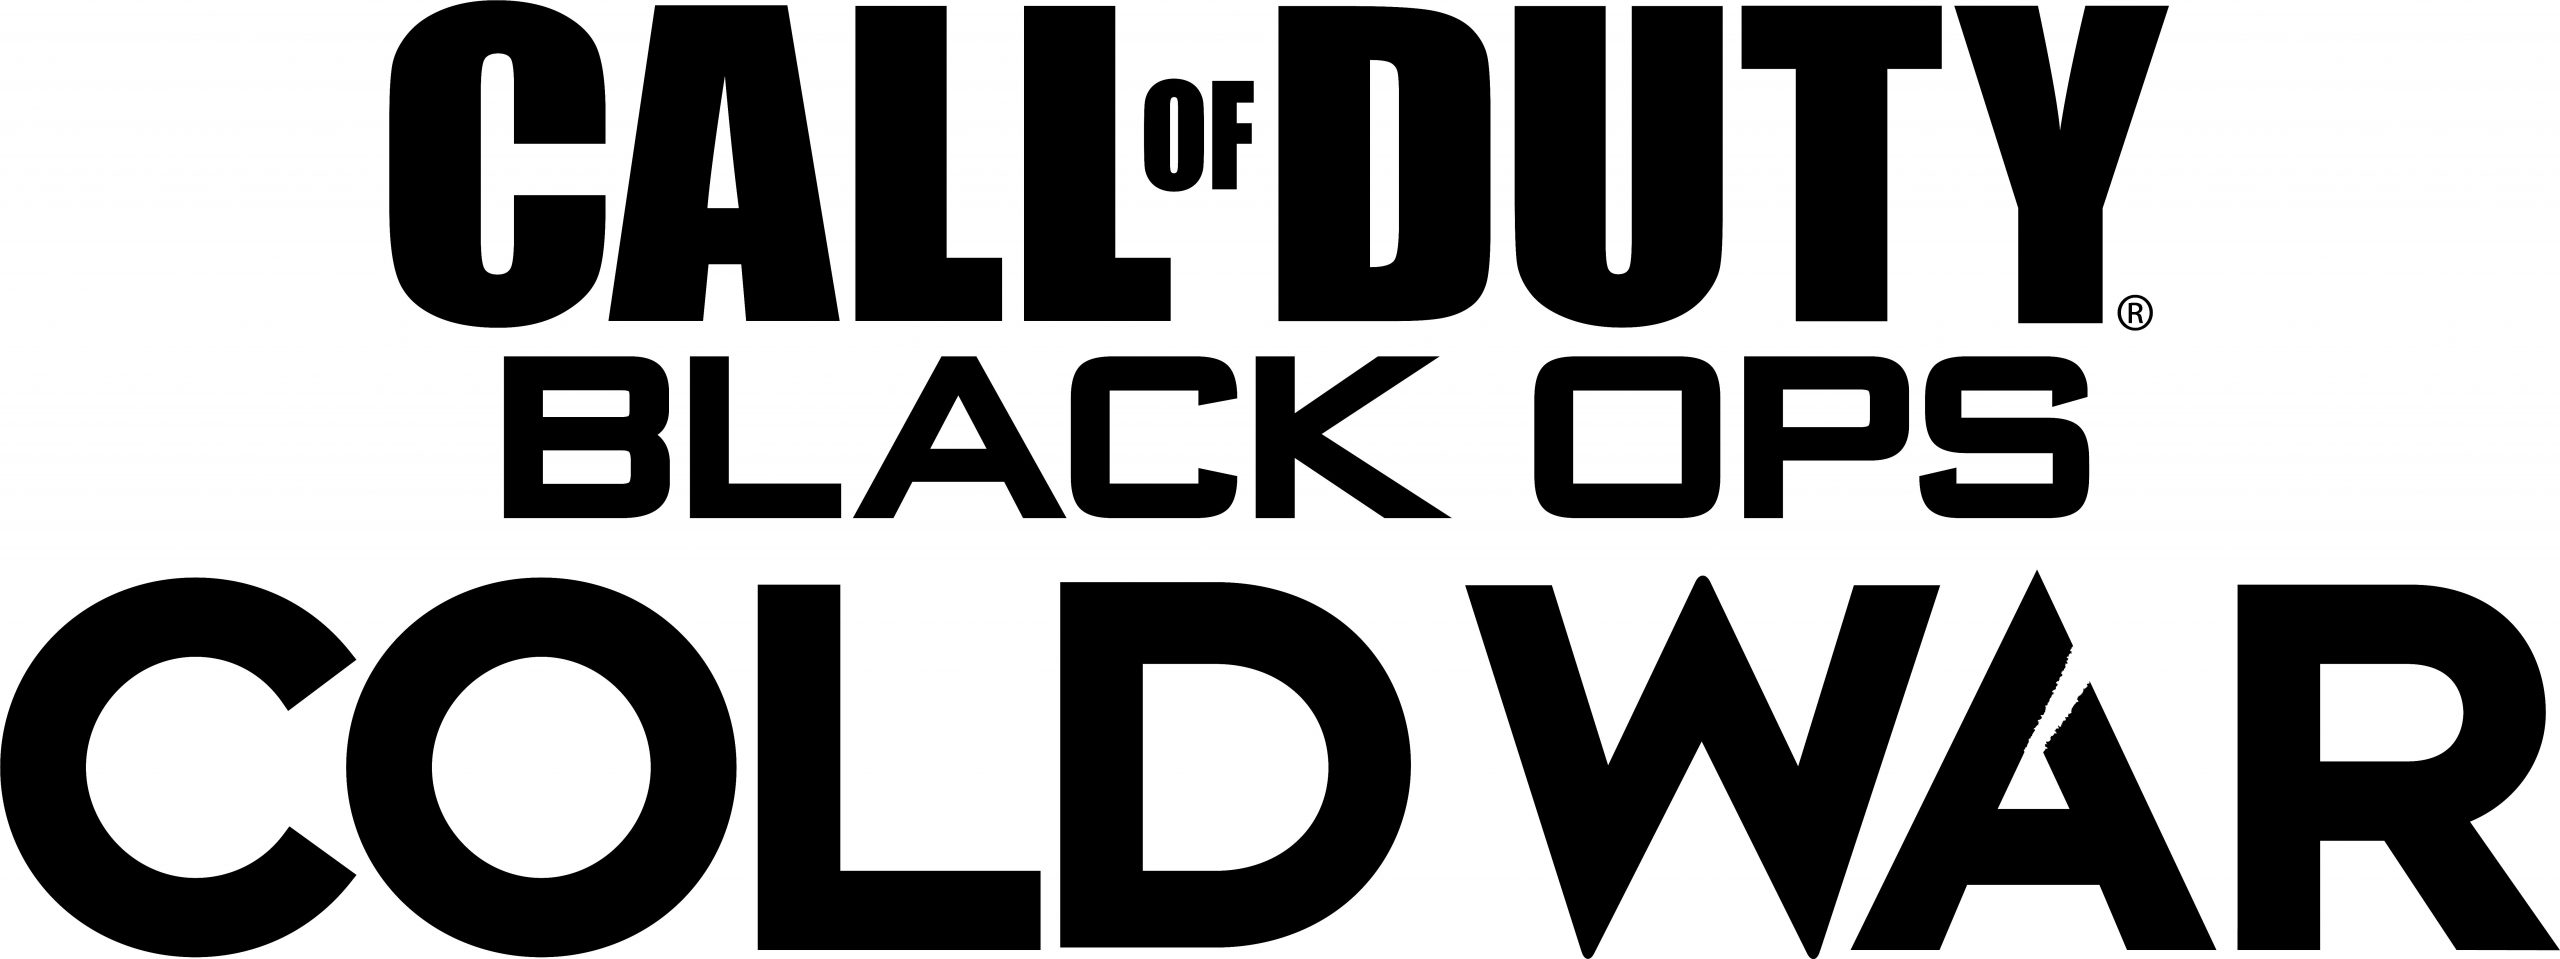 Call of Duty Black Ops Cold War logo